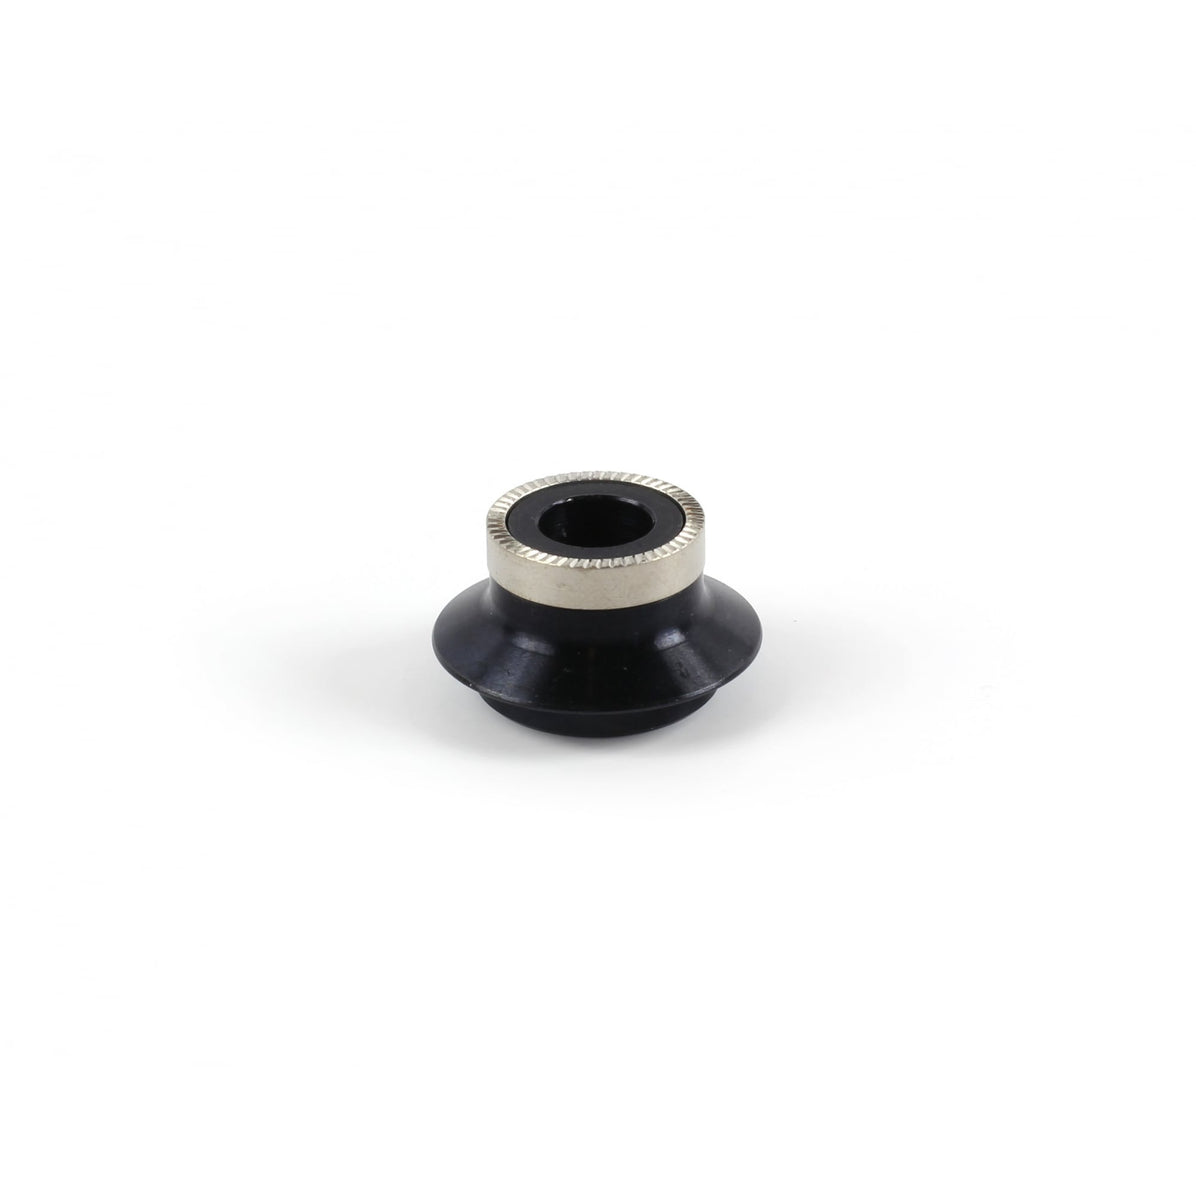 Hope Pro 2 Non-Drive Spacer 10mm